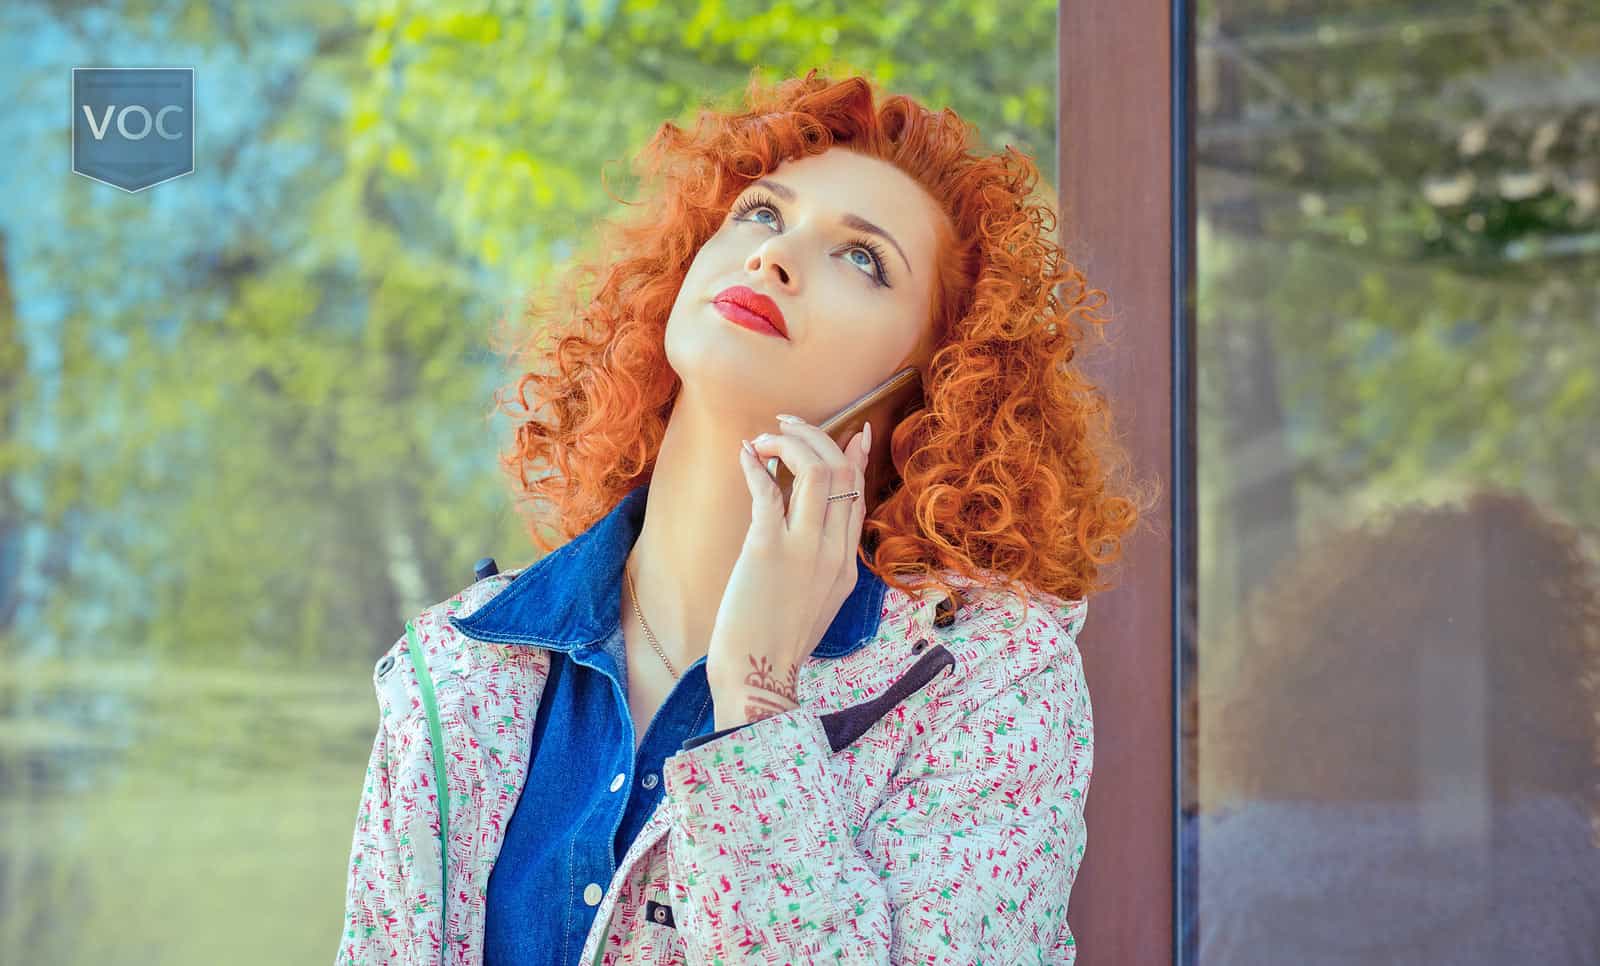 red-head-woman-being-harrassed-while-shes-on-the-phone-with-timeshare-exit-services-company